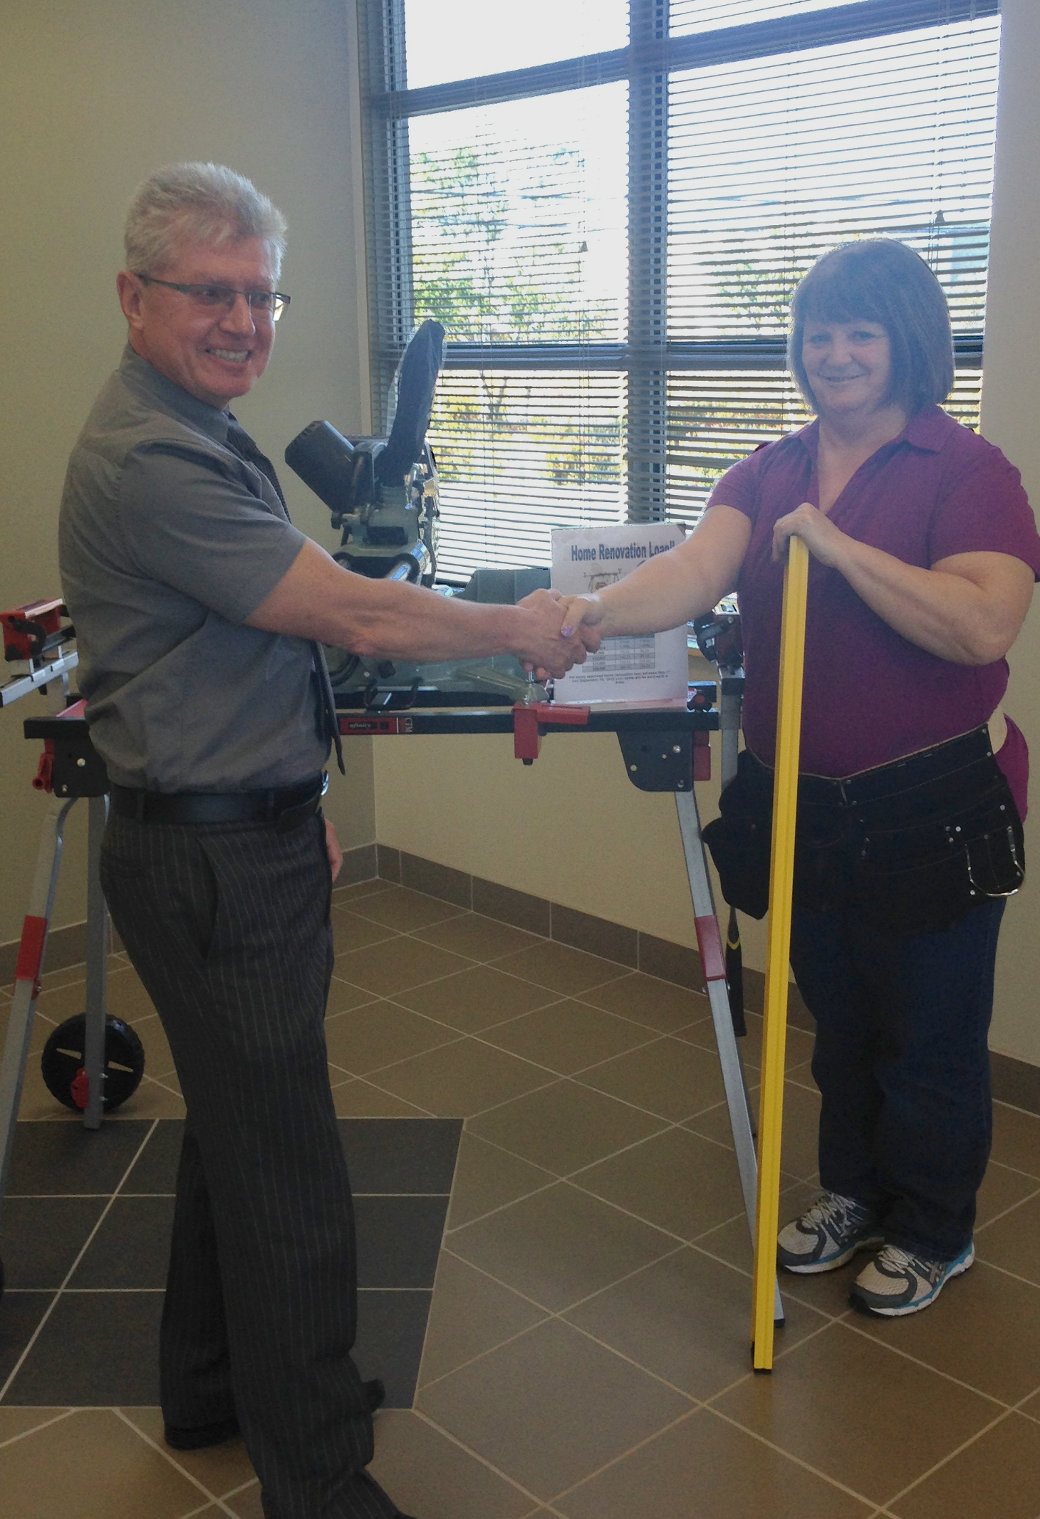 Miss Barbara Carew is the winner of our Home Renovation Campaign that ran from May to September 2016. Brian Quilty, CEO congratulated Barbara on winning the miter saw, table stand and accessories. Congratulations Barbara!